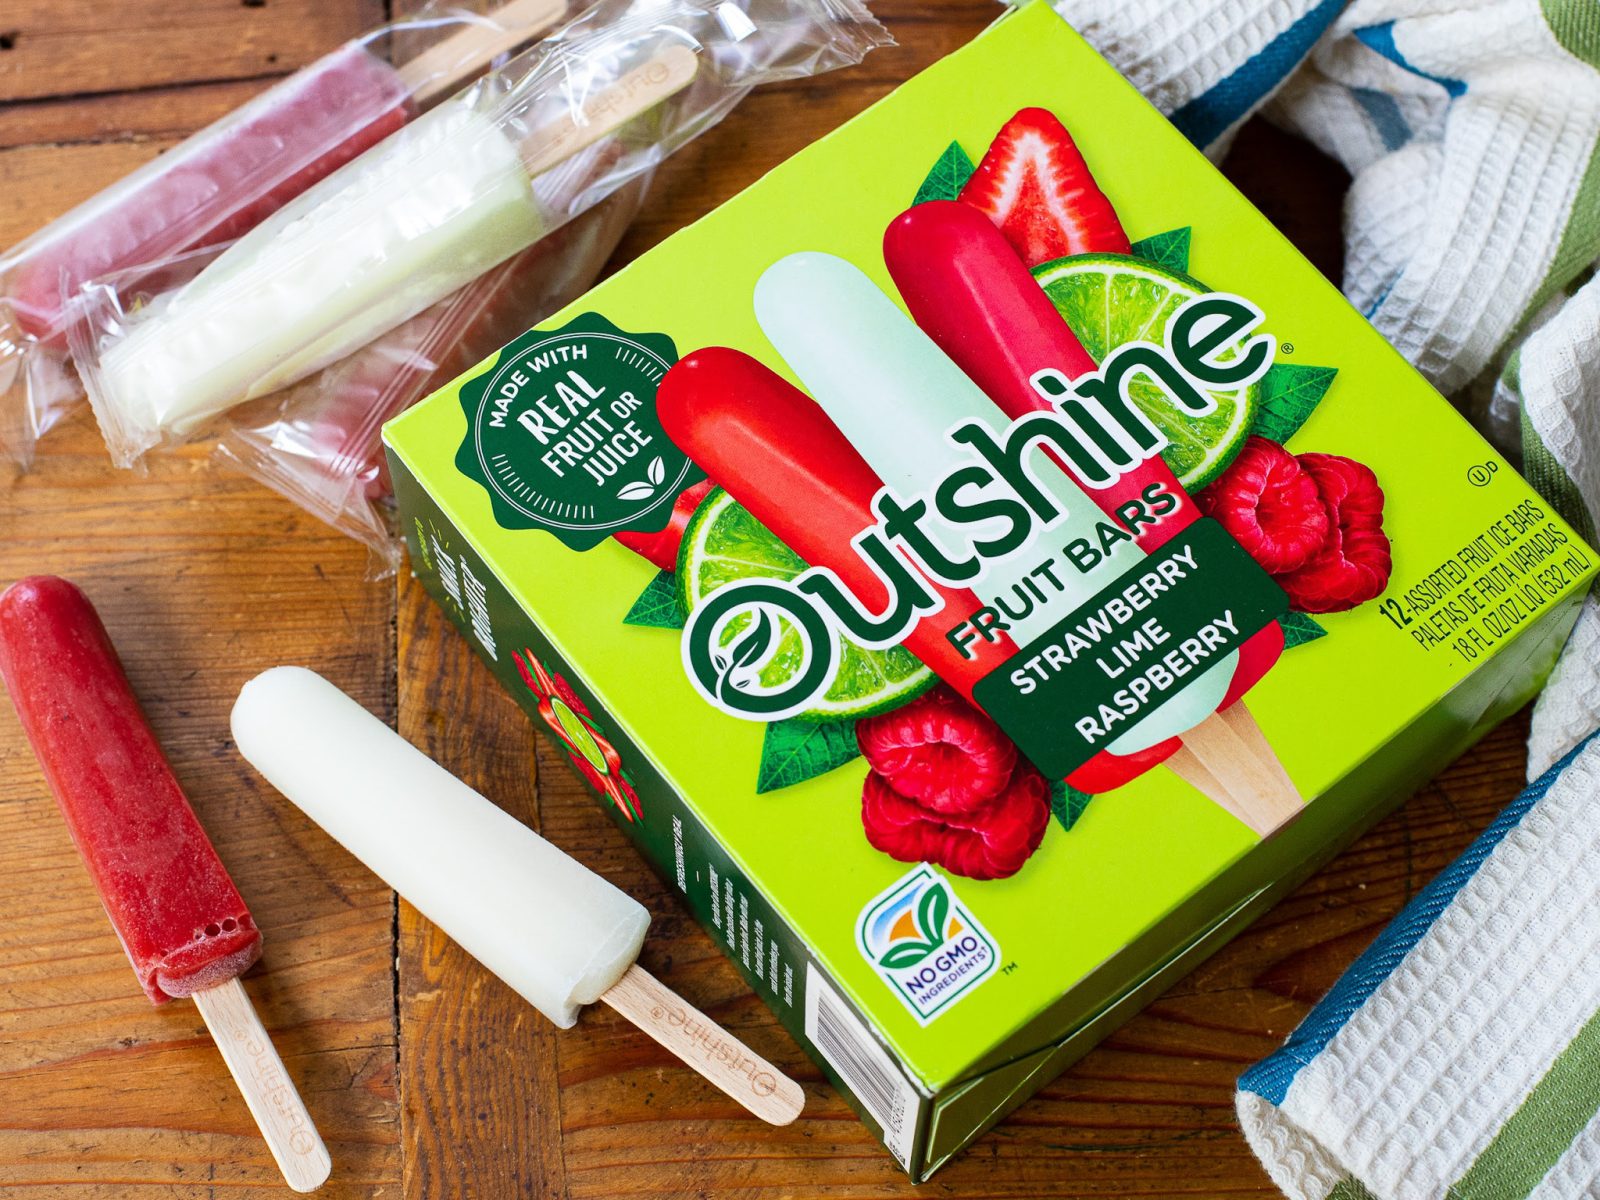 Outshine Bars As Low As $2.99 Per Box At Kroger